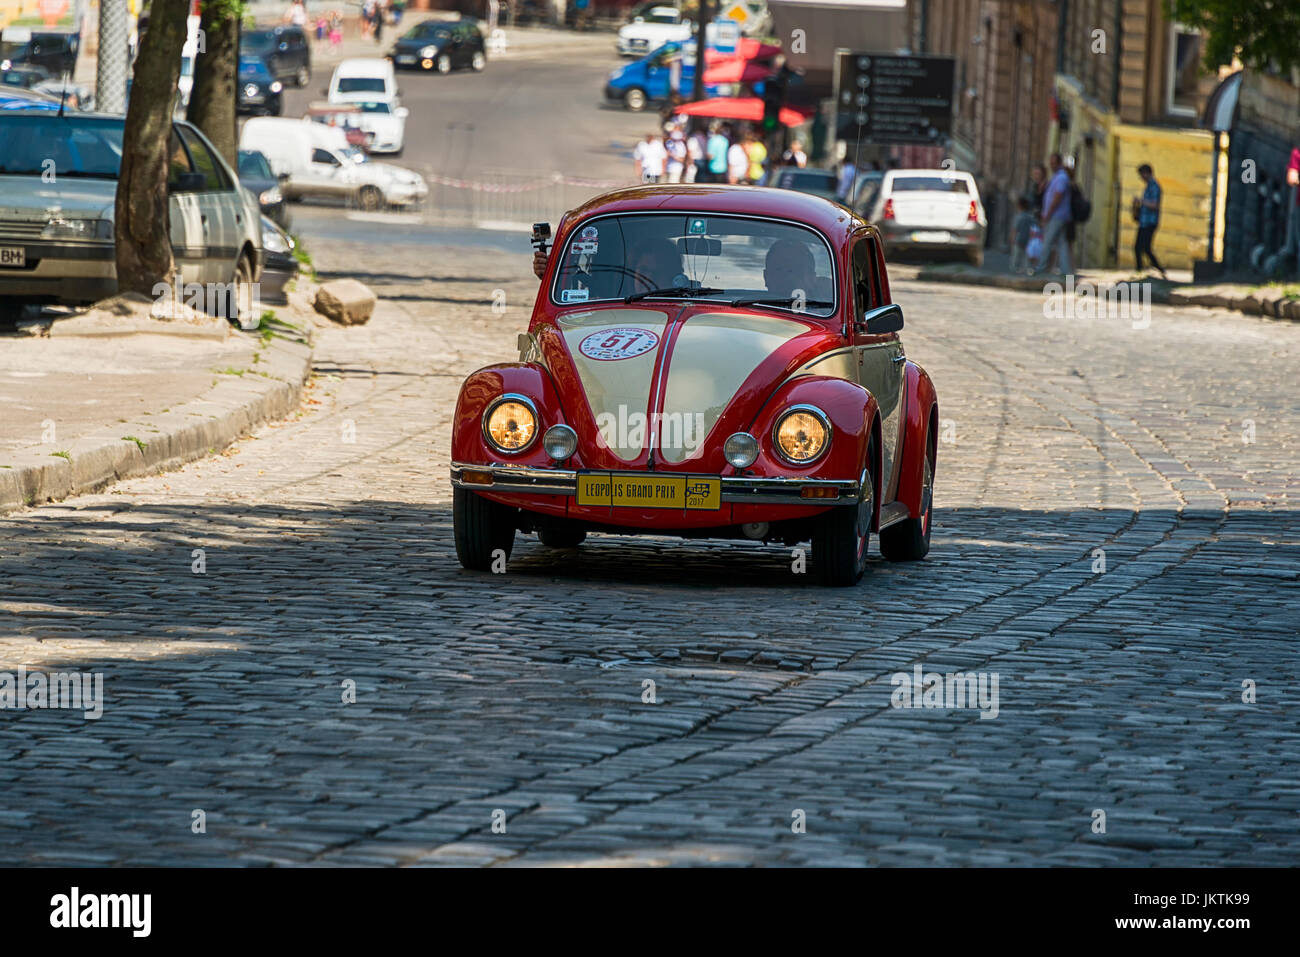 Lviv, Ukraine - June 4, 2017: Old retro car Volkswagen KAFER with its owner and au unknown passenger taking participation in race Leopolis grand prix  Stock Photo